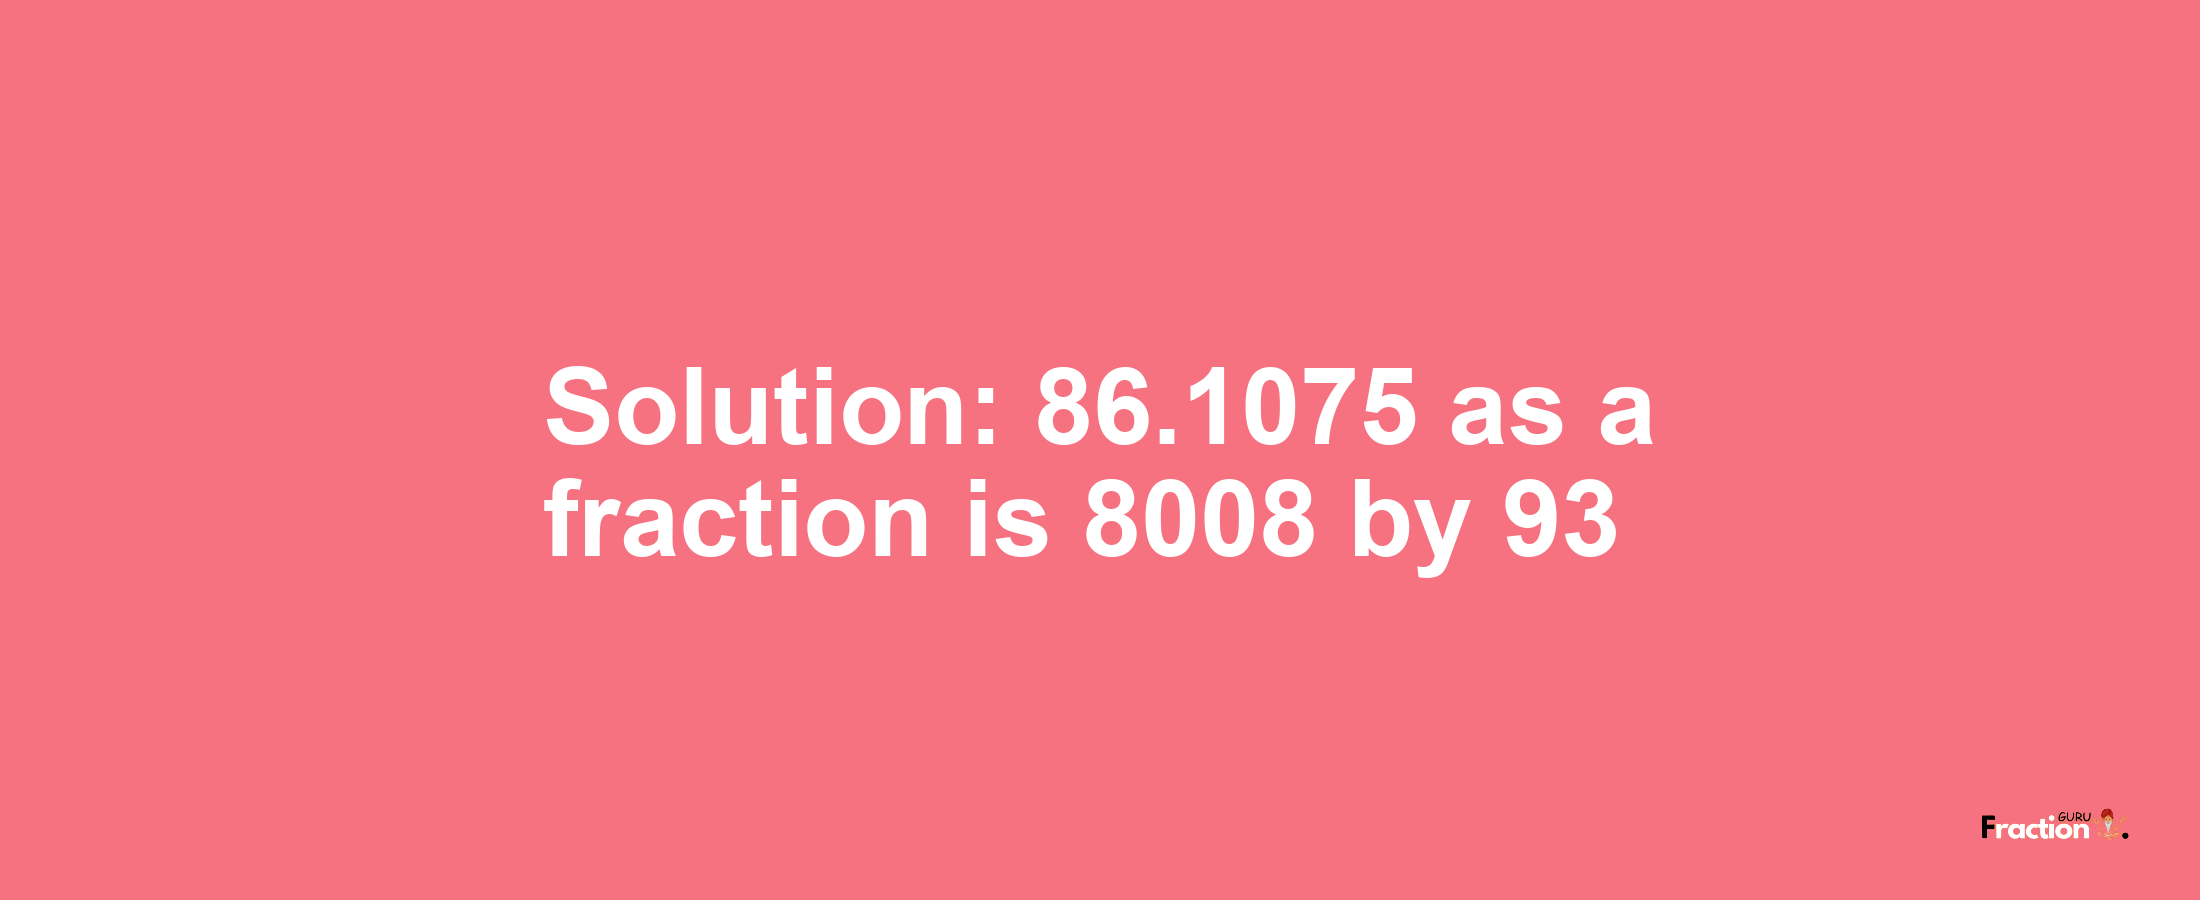 Solution:86.1075 as a fraction is 8008/93